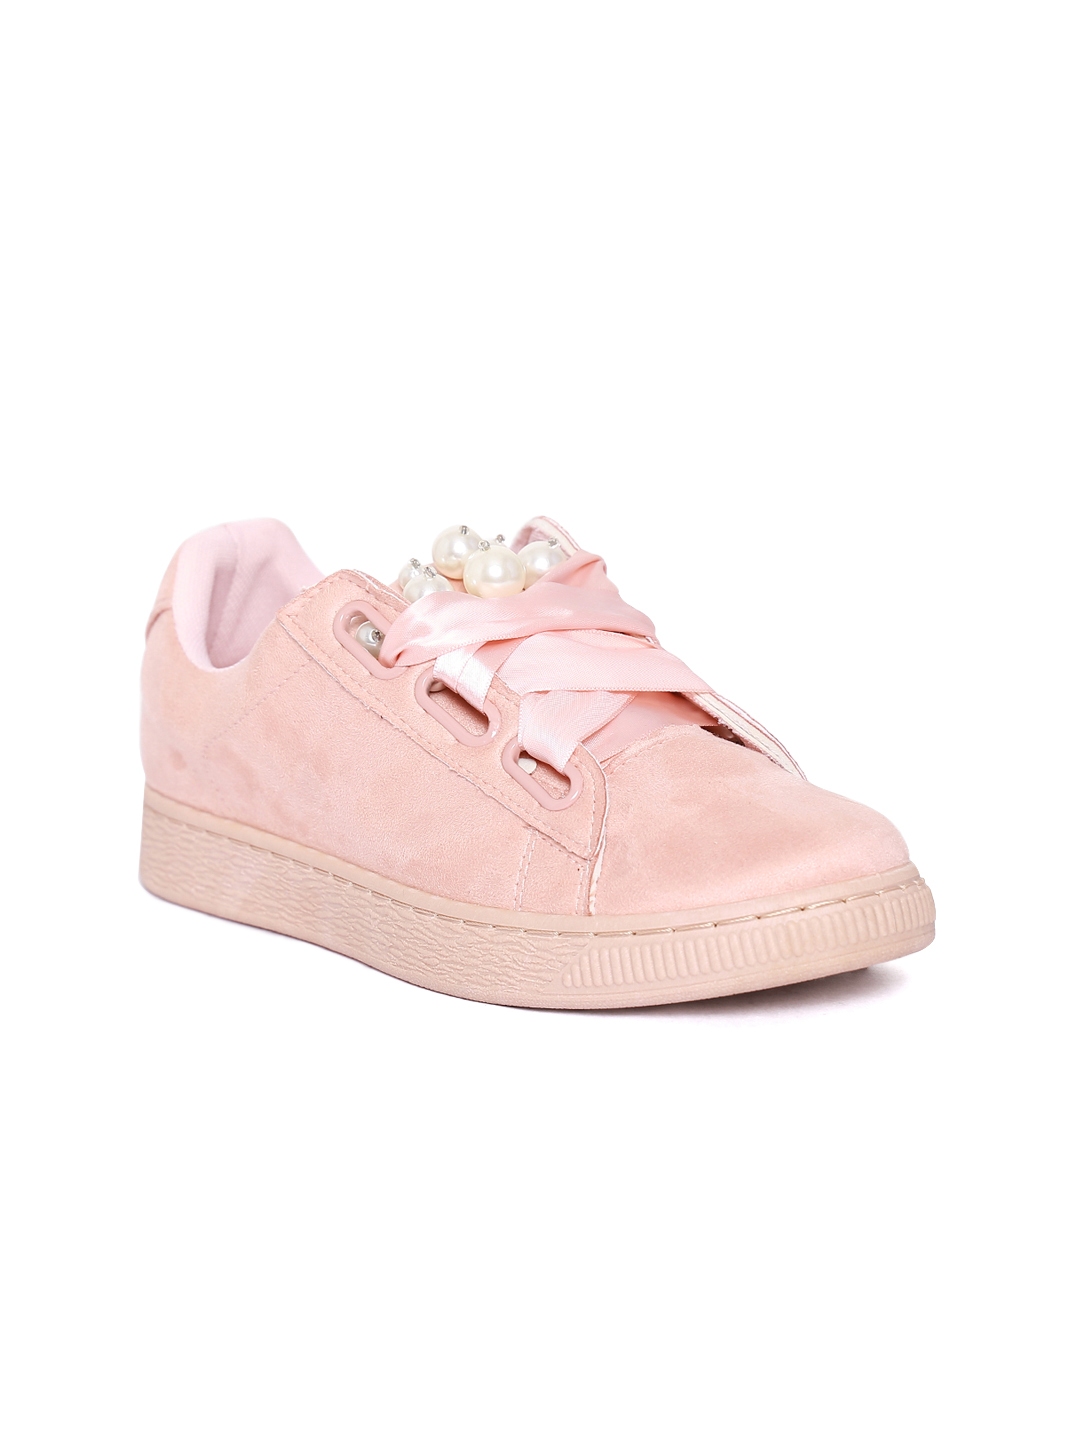 catwalk pink casual shoes